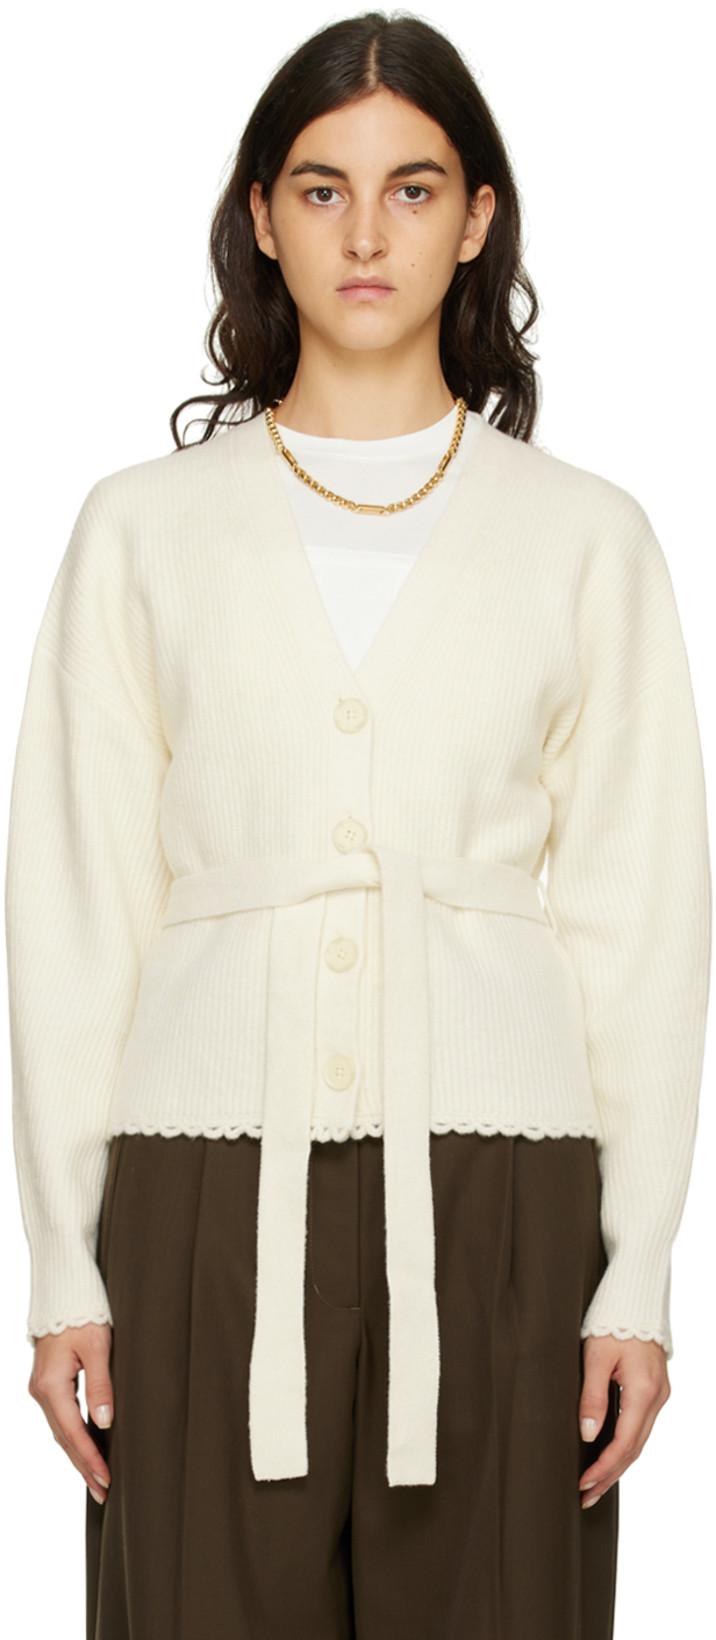 White Scalloped Cardigan by 3.1 PHILLIP LIM